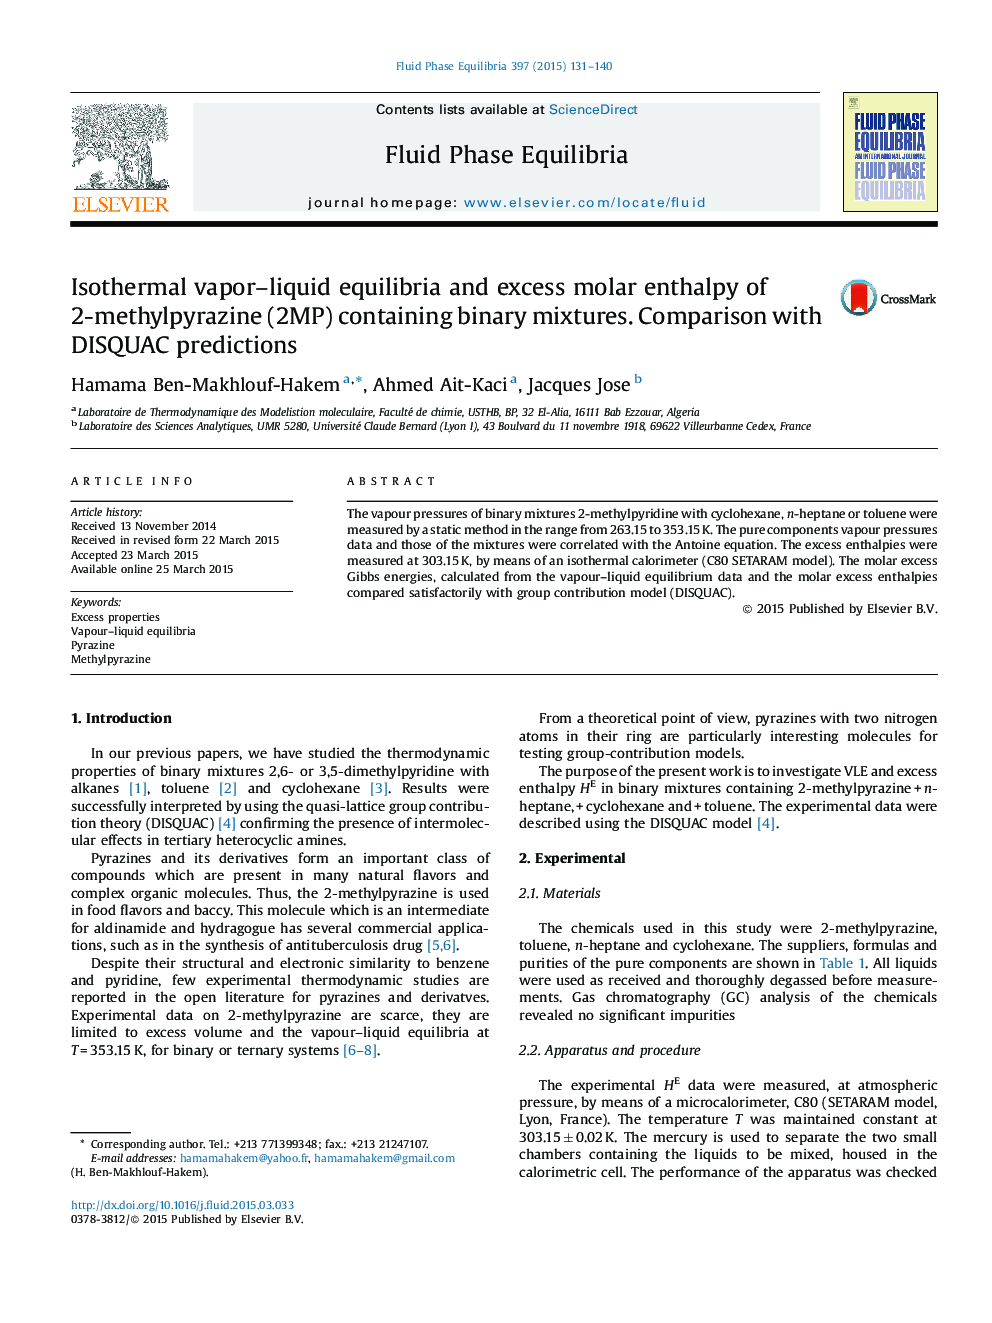 Isothermal vapor–liquid equilibria and excess molar enthalpy of 2-methylpyrazine (2MP) containing binary mixtures. Comparison with DISQUAC predictions